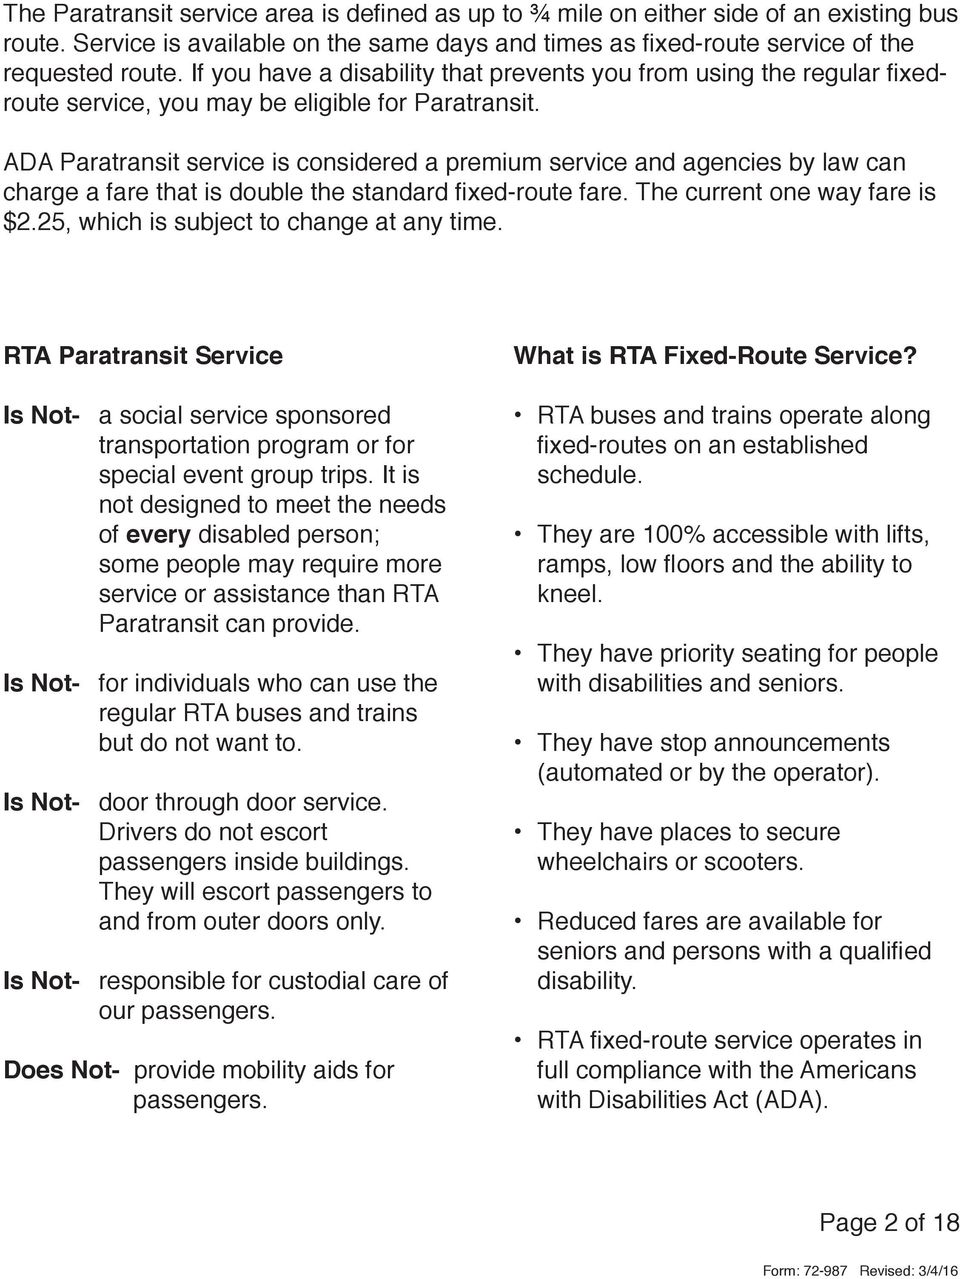 ADA Paratransit service is considered a premium service and agencies by law can charge a fare that is double the standard fixed-route fare. The current one way fare is $2.